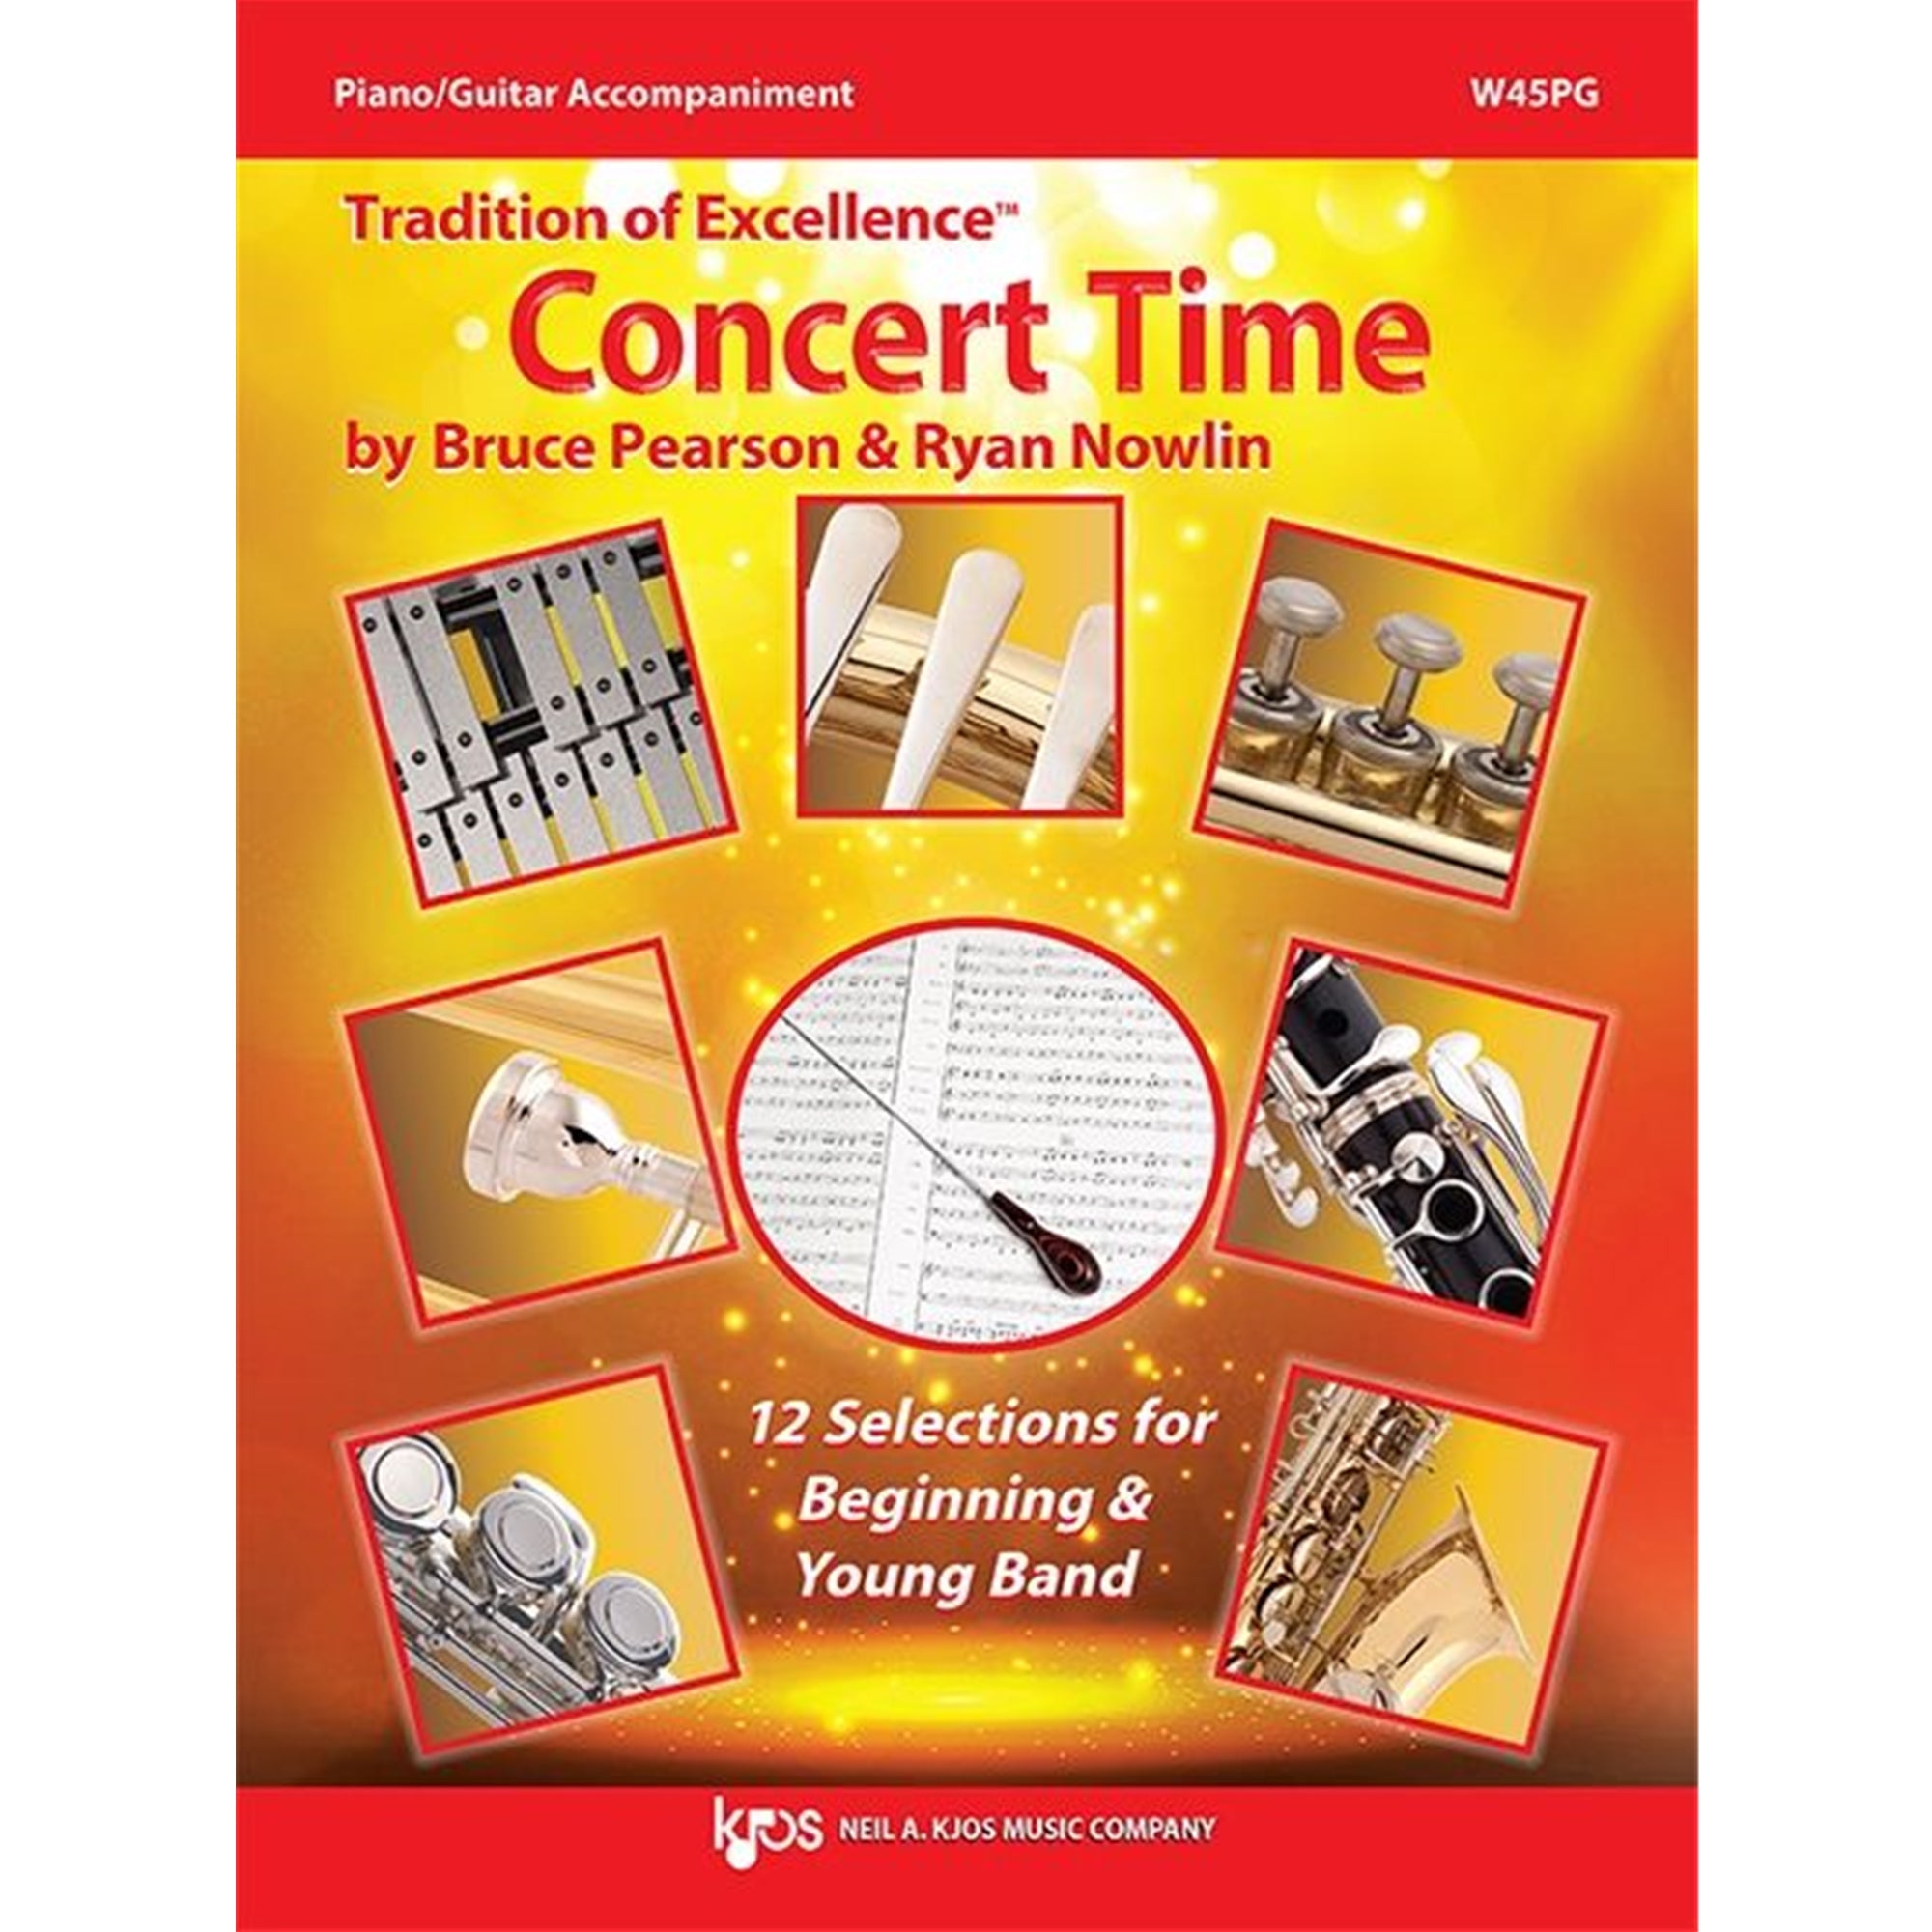 KJOS W45PG Tradition of Excellence Concert Time Piano/Guitar Accompaniment